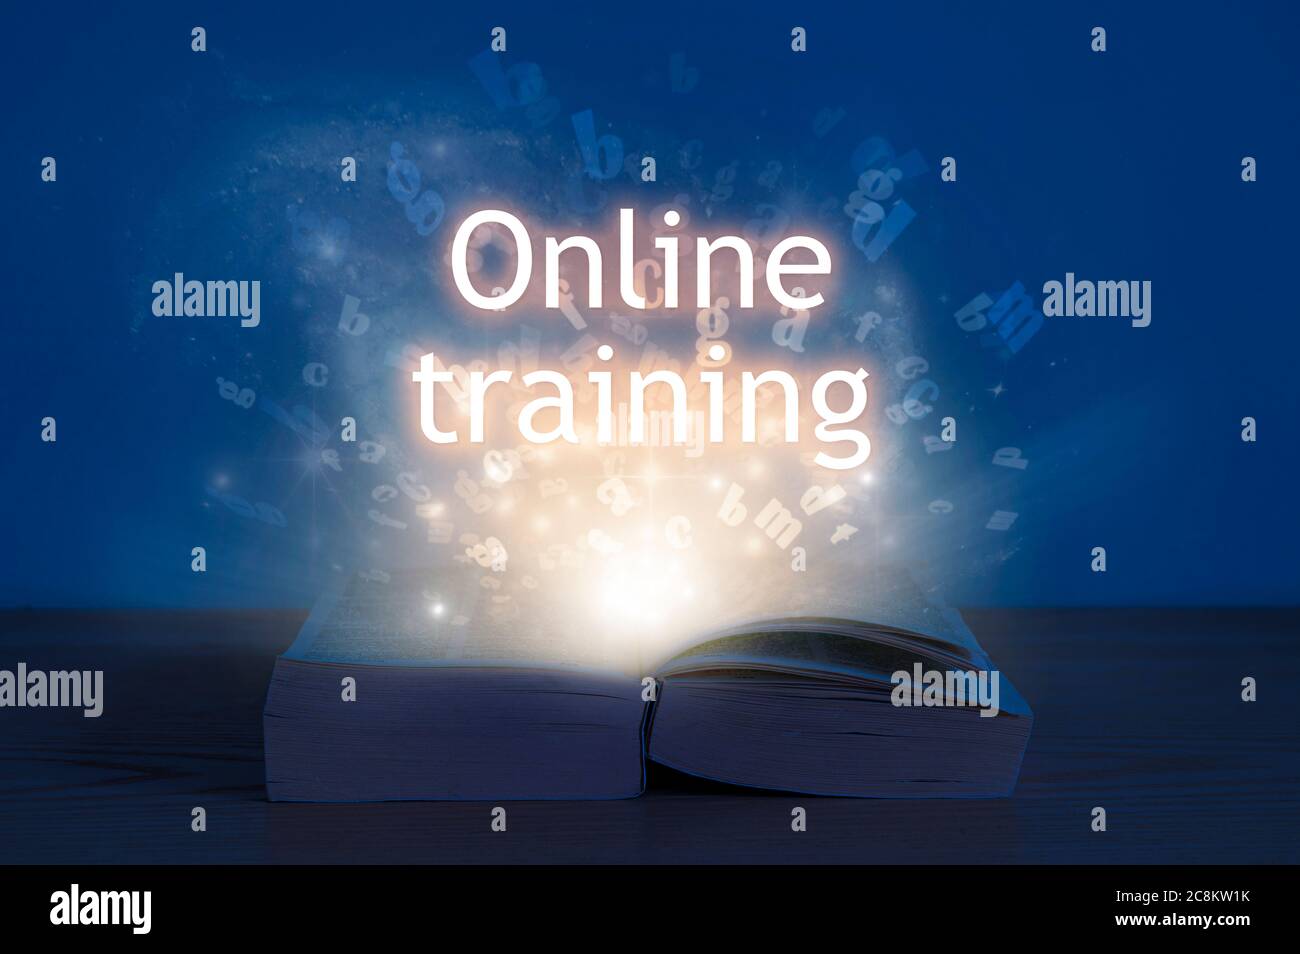 Online training concept. Light coming from open book with words online training. Stock Photo